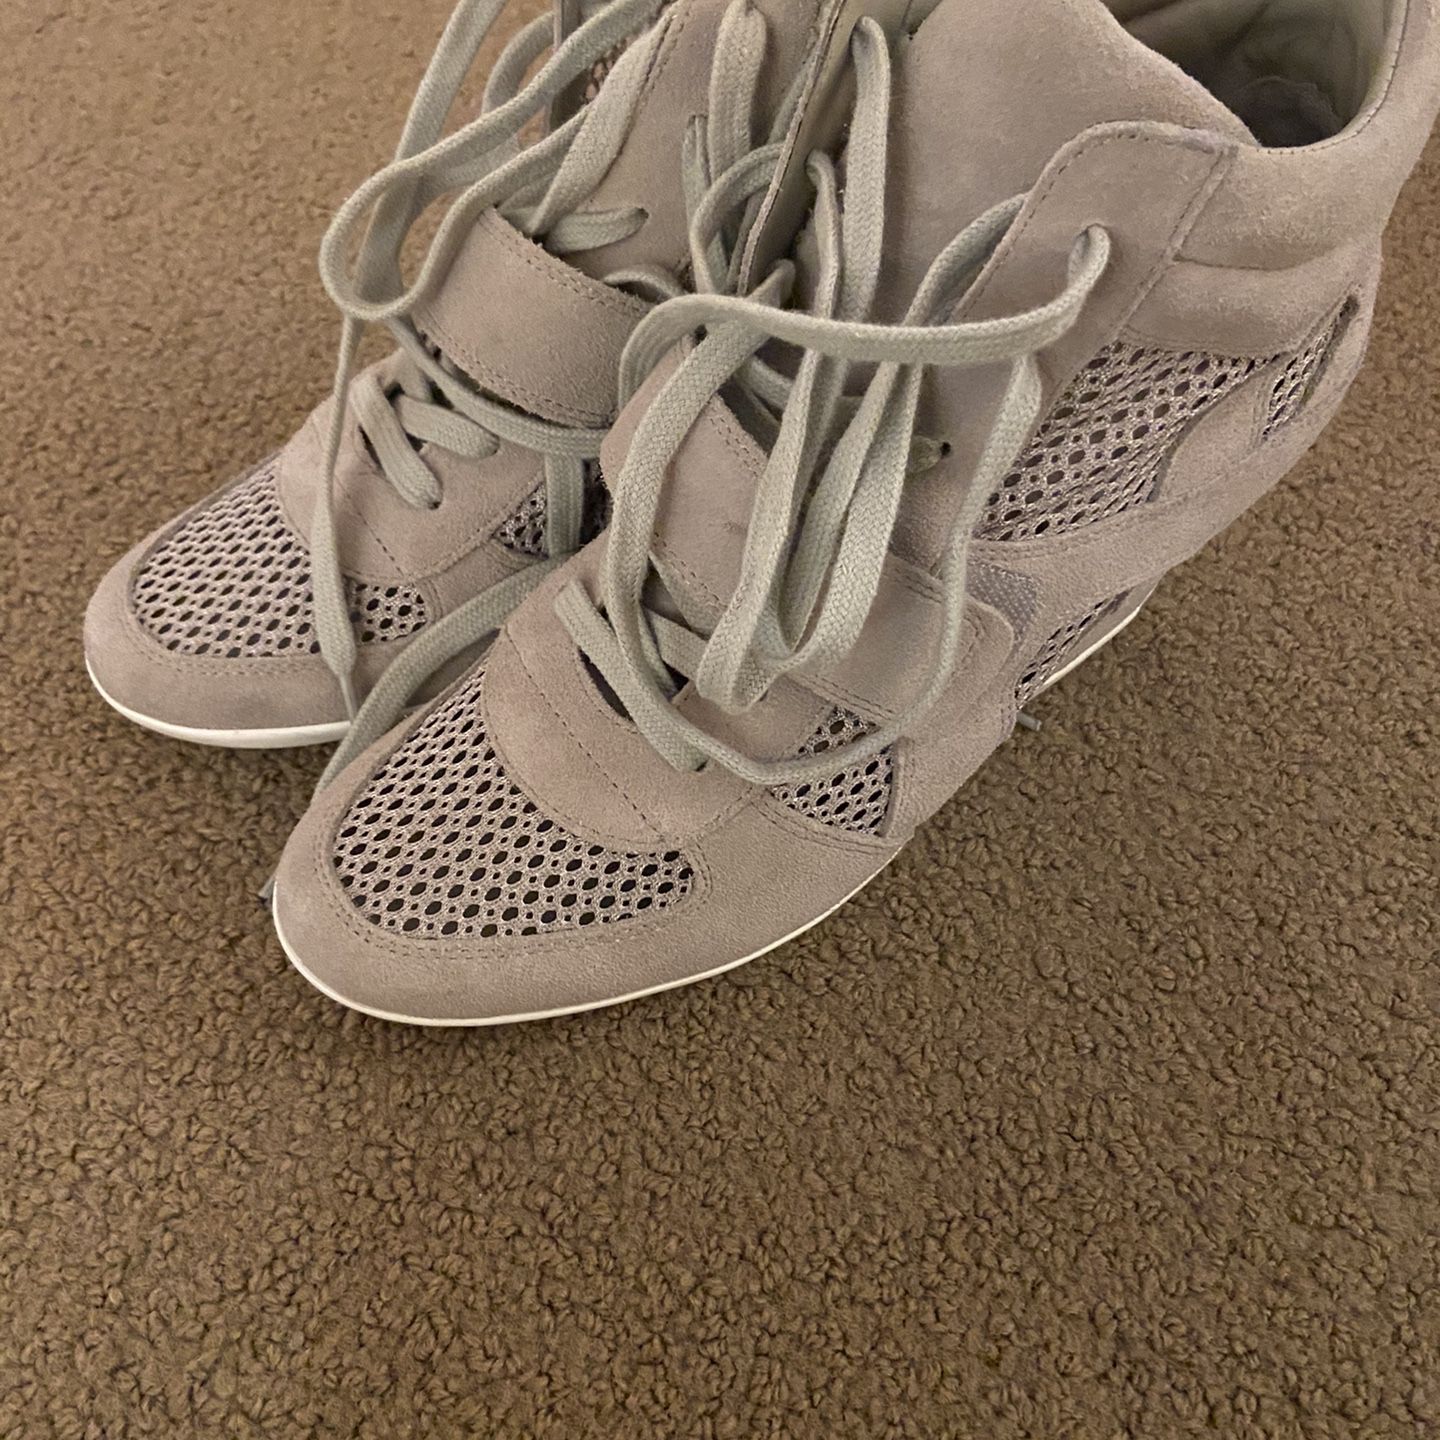 Light Grey Lace Up Sneakers With A Heel